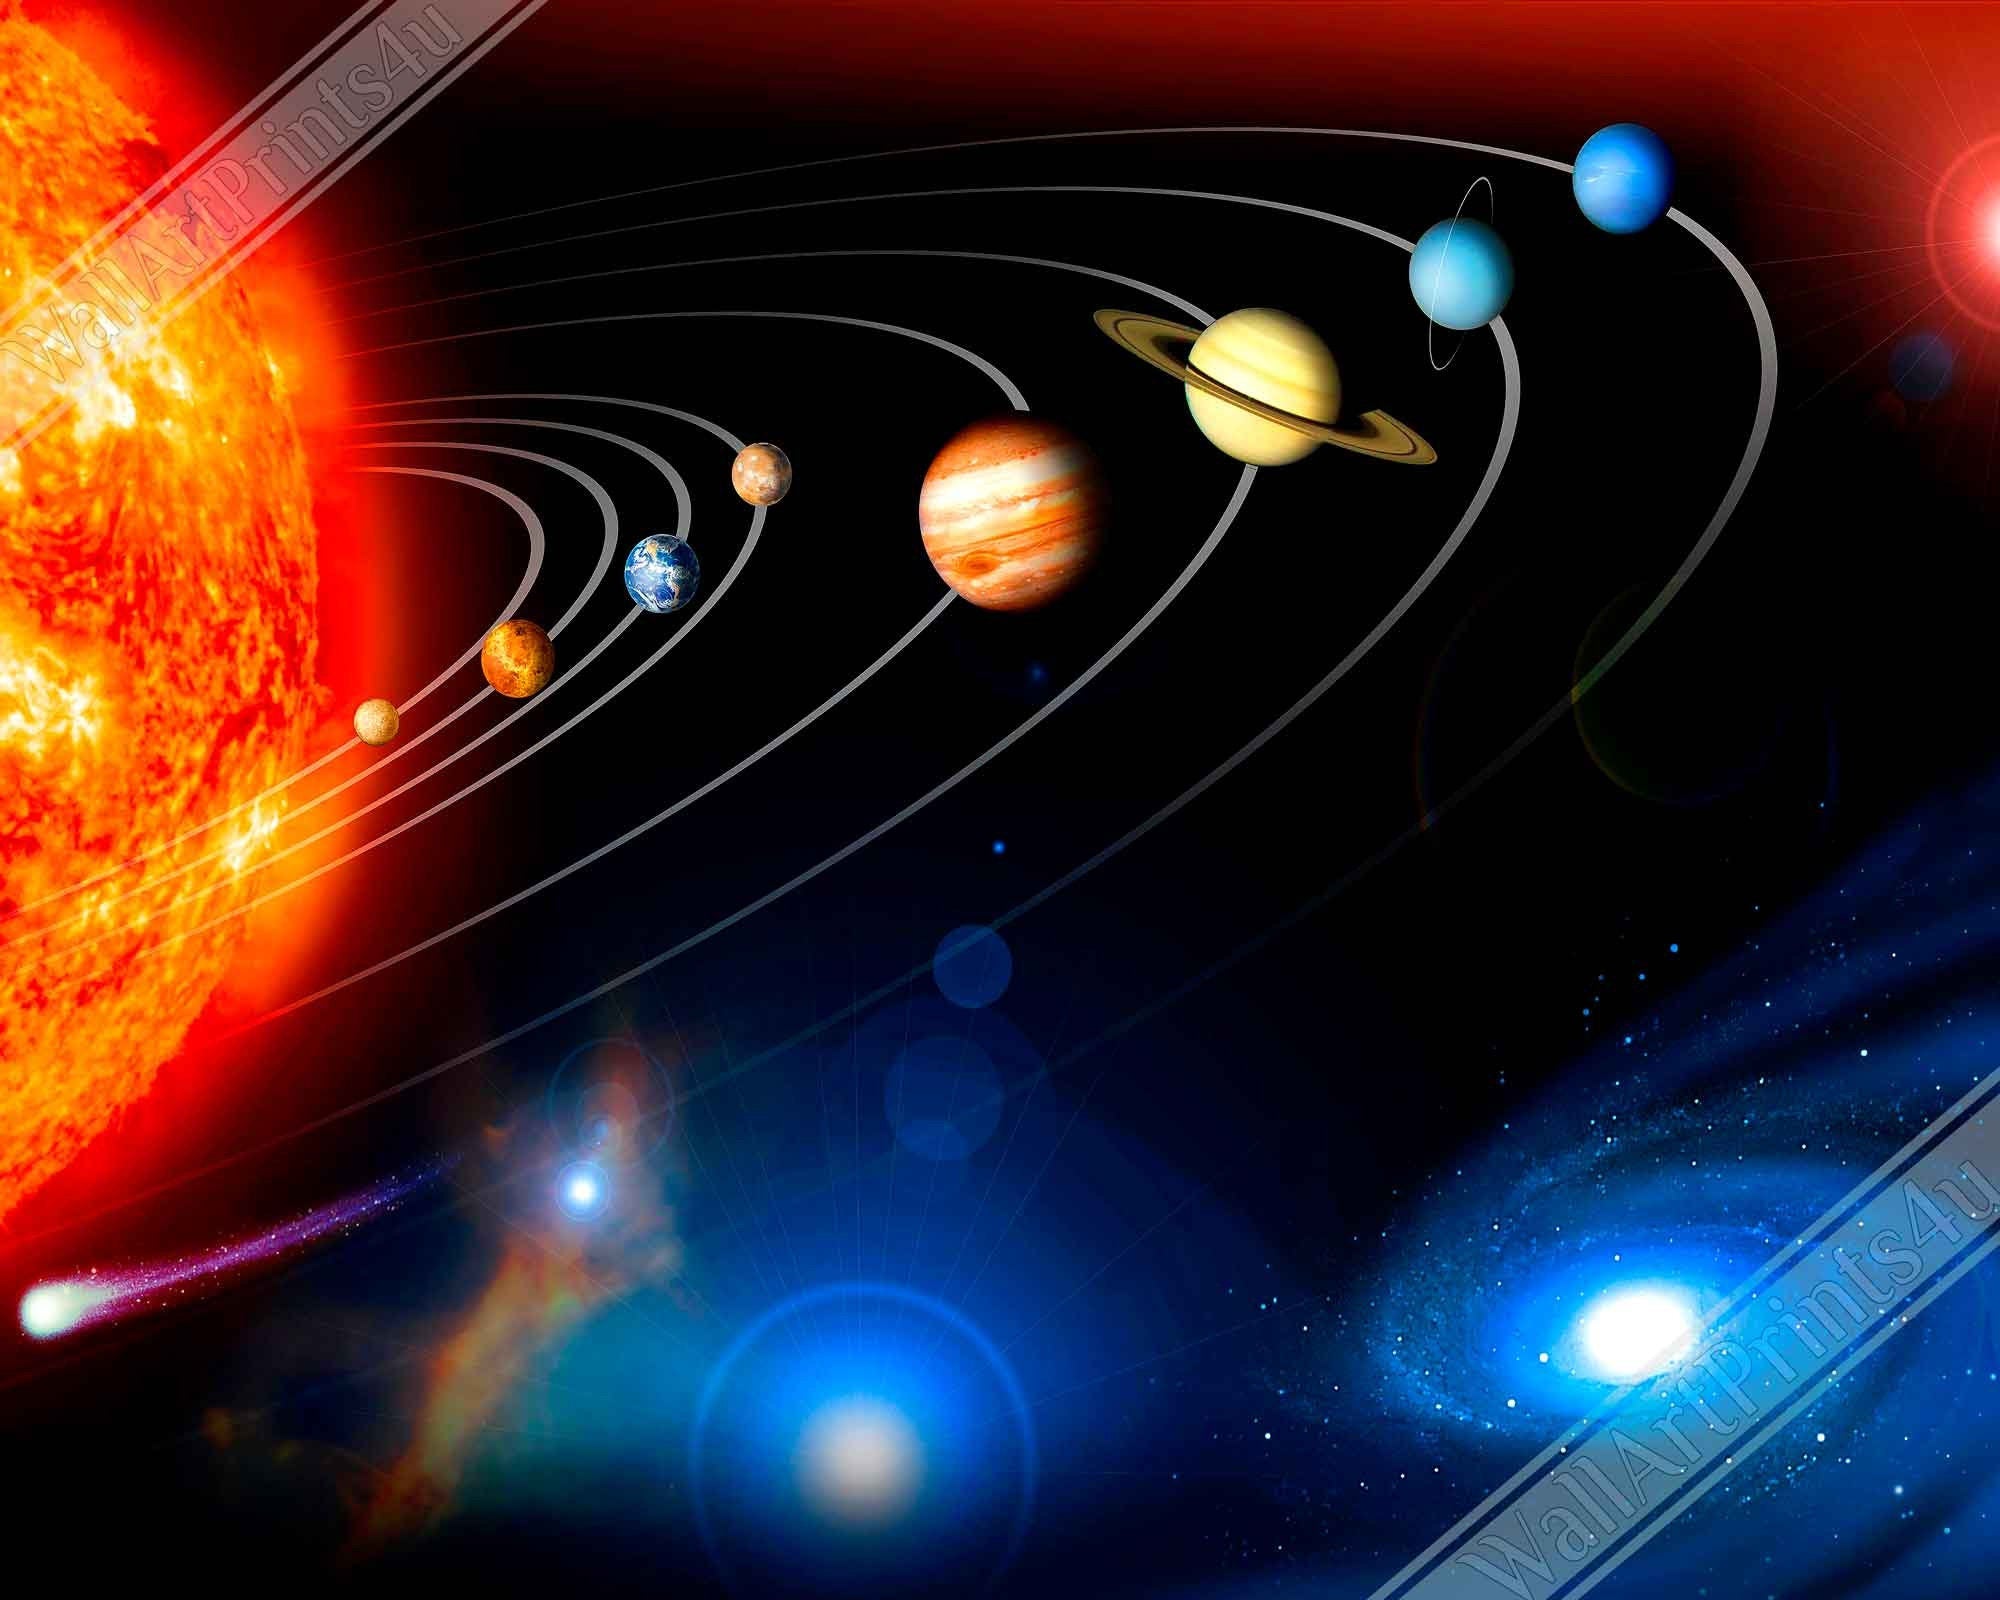 Solar System Canvas Nasa Canvas Of The Planets Solar System Canvas Print - WallArtPrints4U